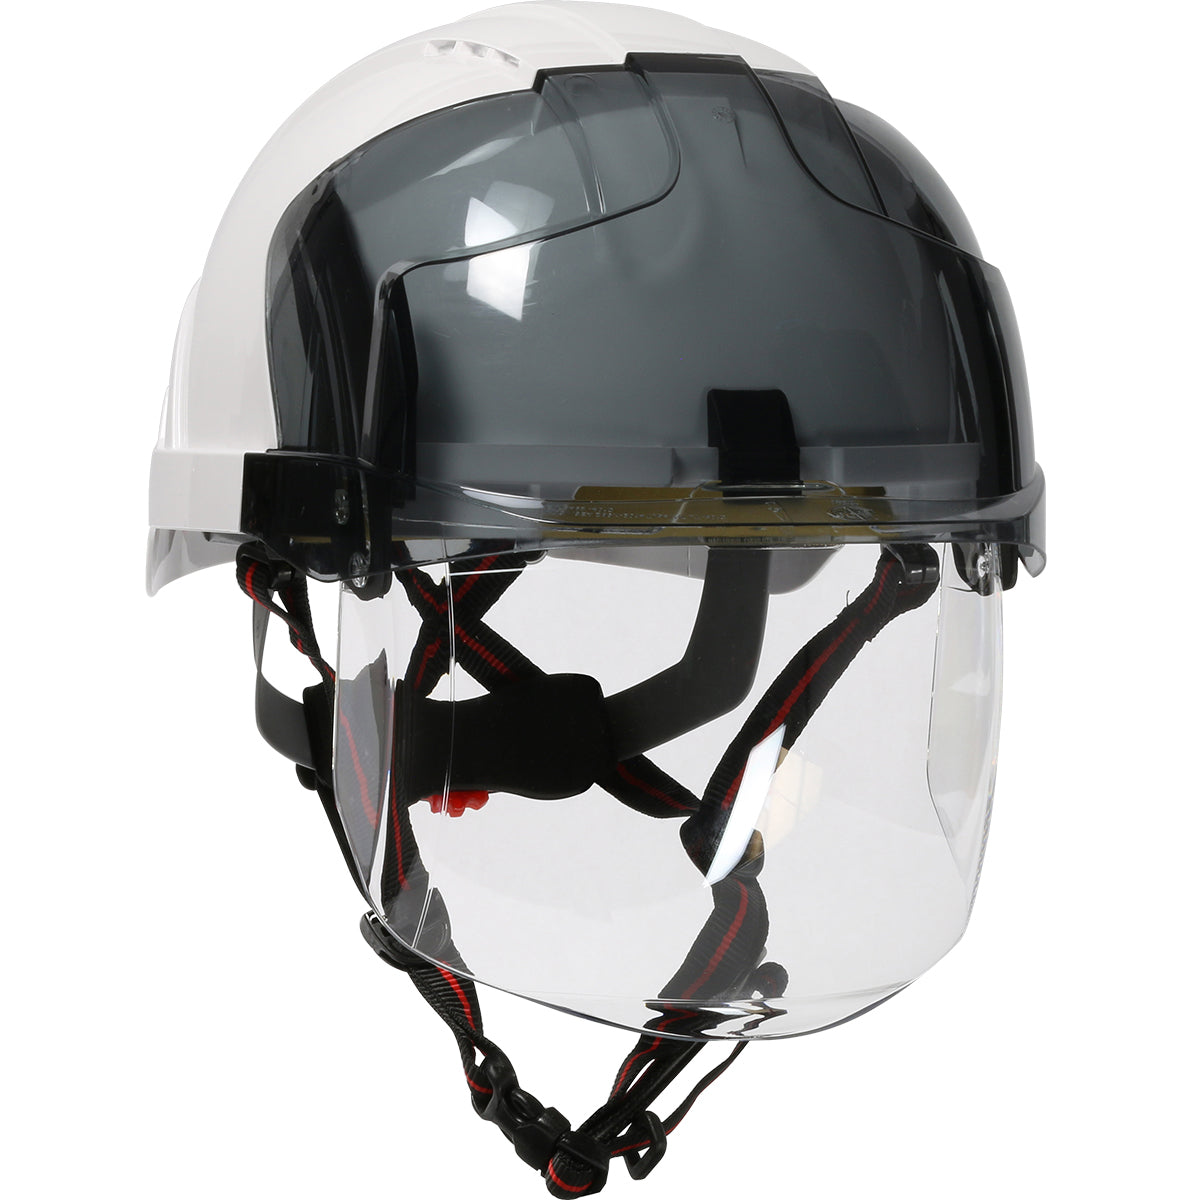 EVO® VISTA™ ASCEND™ Type I, Non-vented Industrial Safety Helmet with fully adjustable four point chinstrap, Lightweight ABS Shell, Integrated Faceshield, 6-Point Polyester Suspension and Wheel Ratchet Adjustment